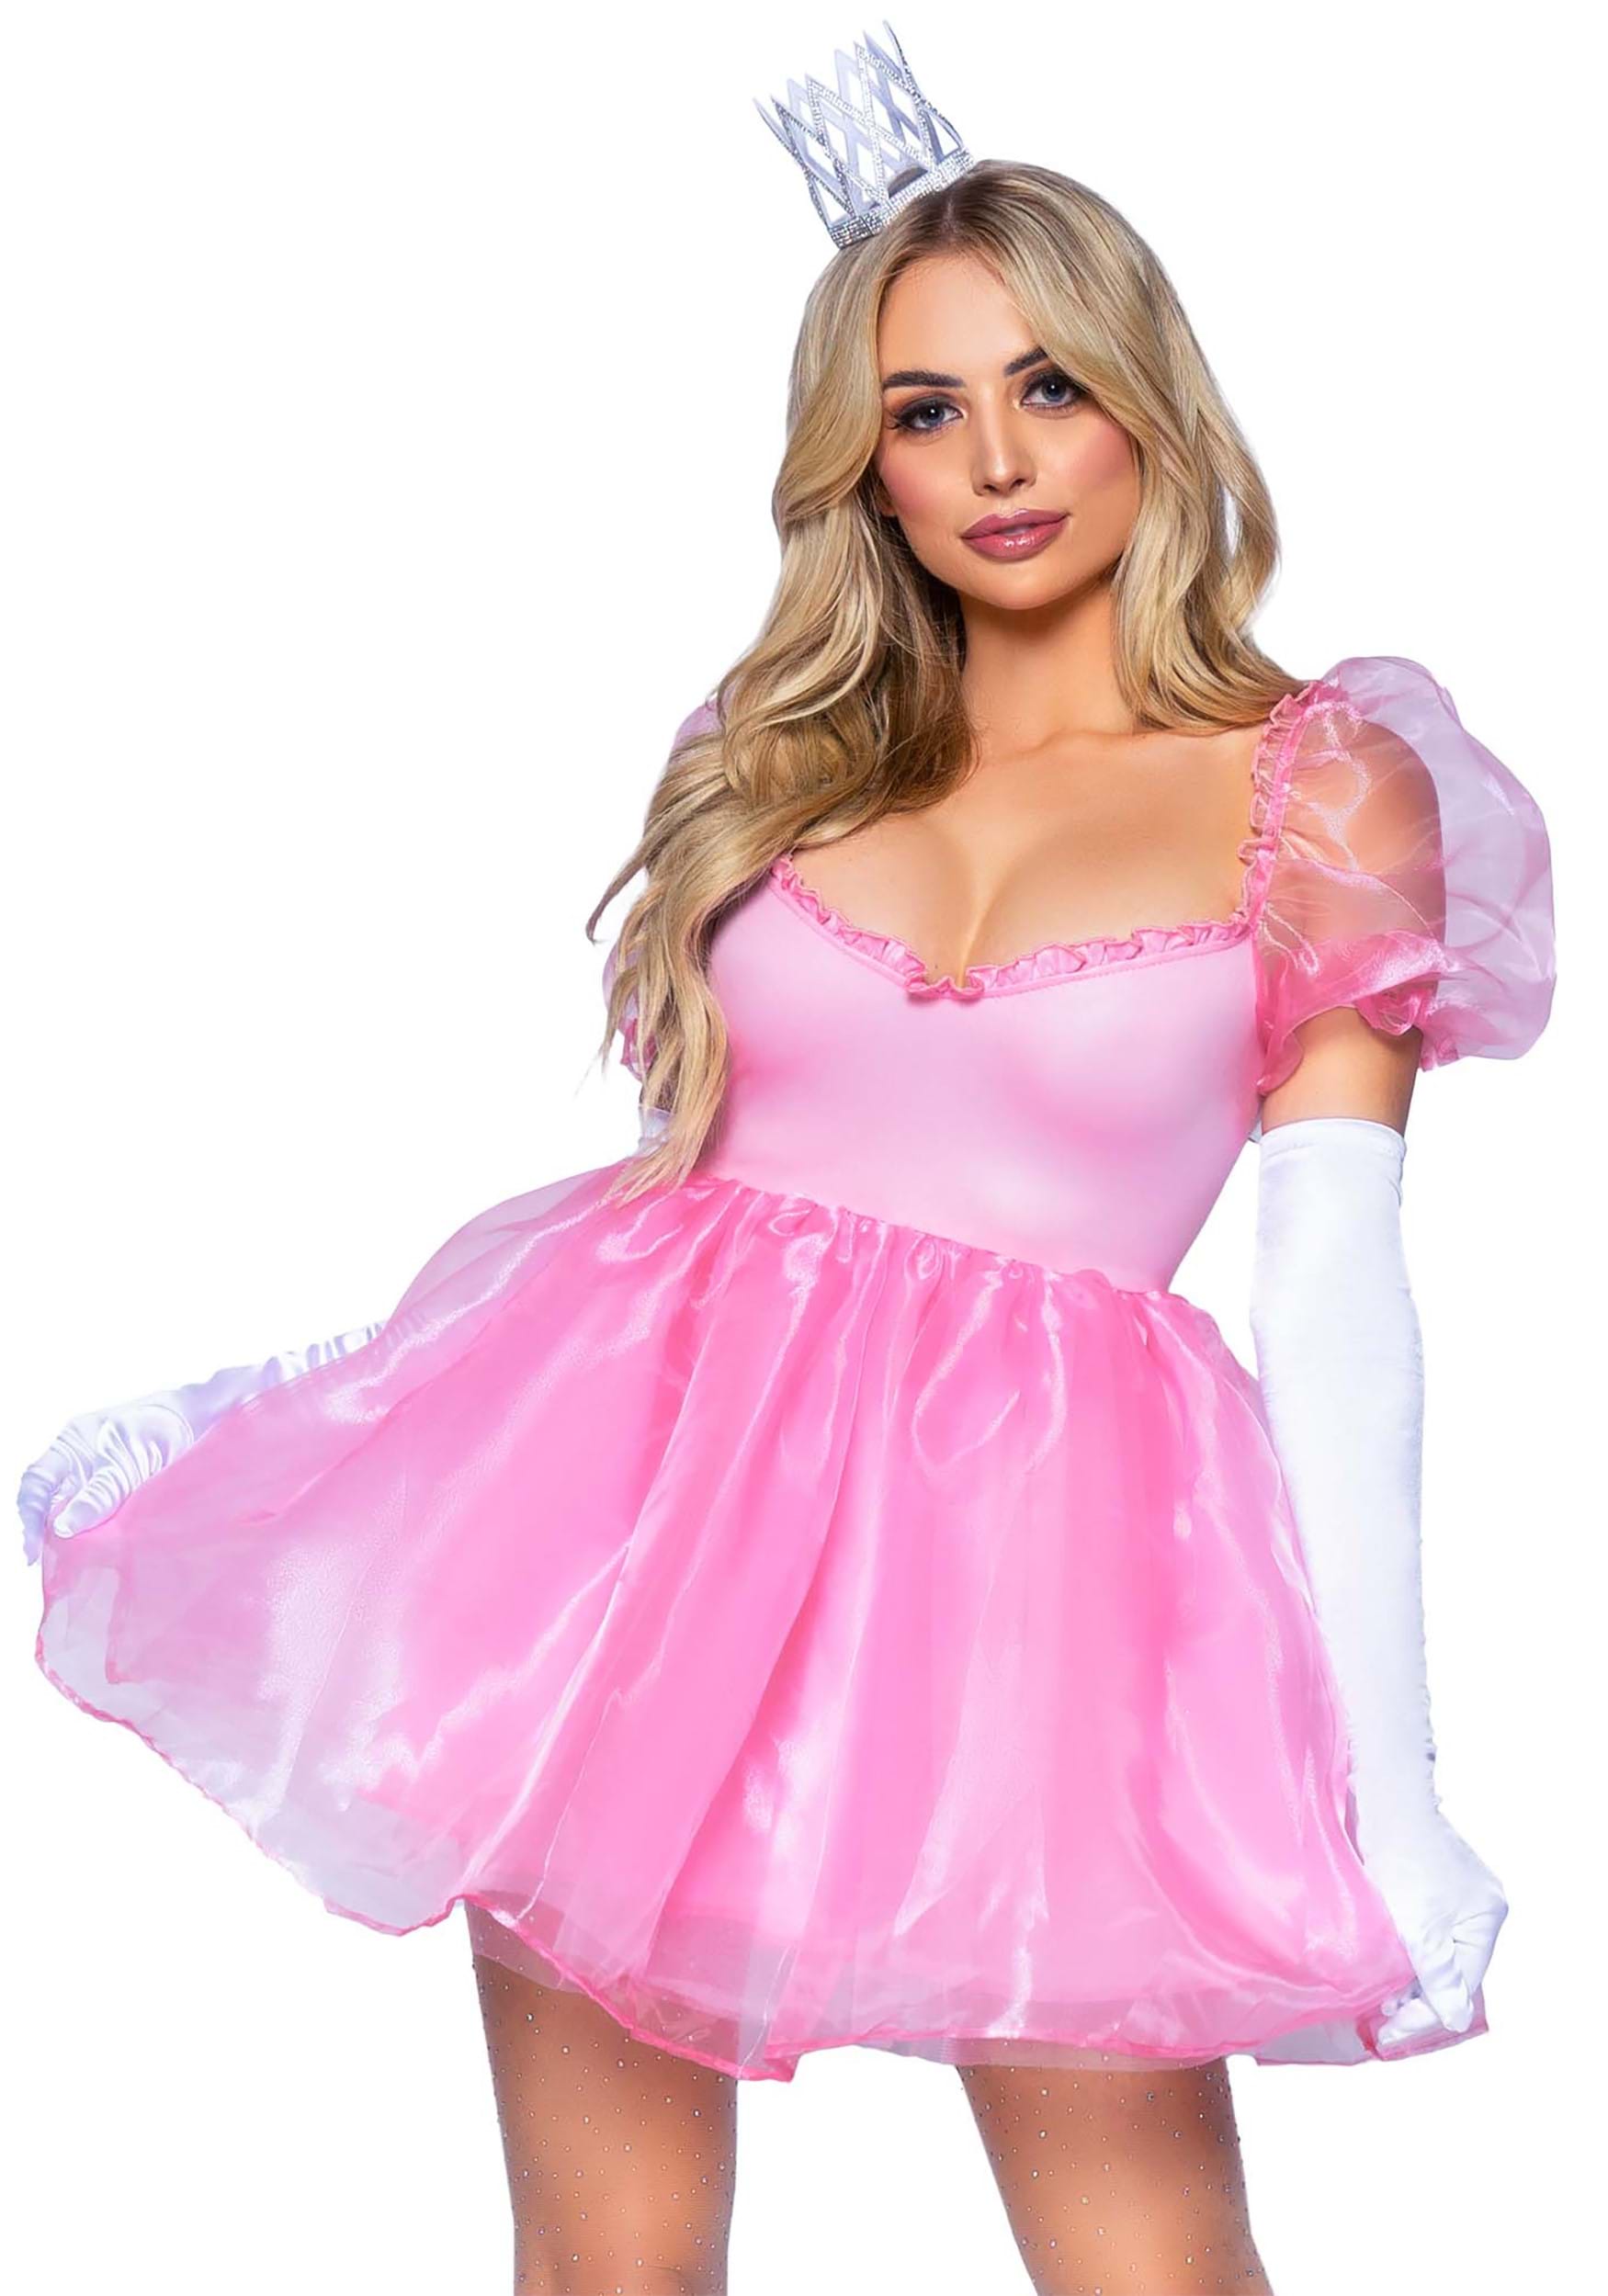 https://images.halloweencostumes.ca/products/82814/1-1/pink-irridescent-organza-babydoll-dress-costume.jpg